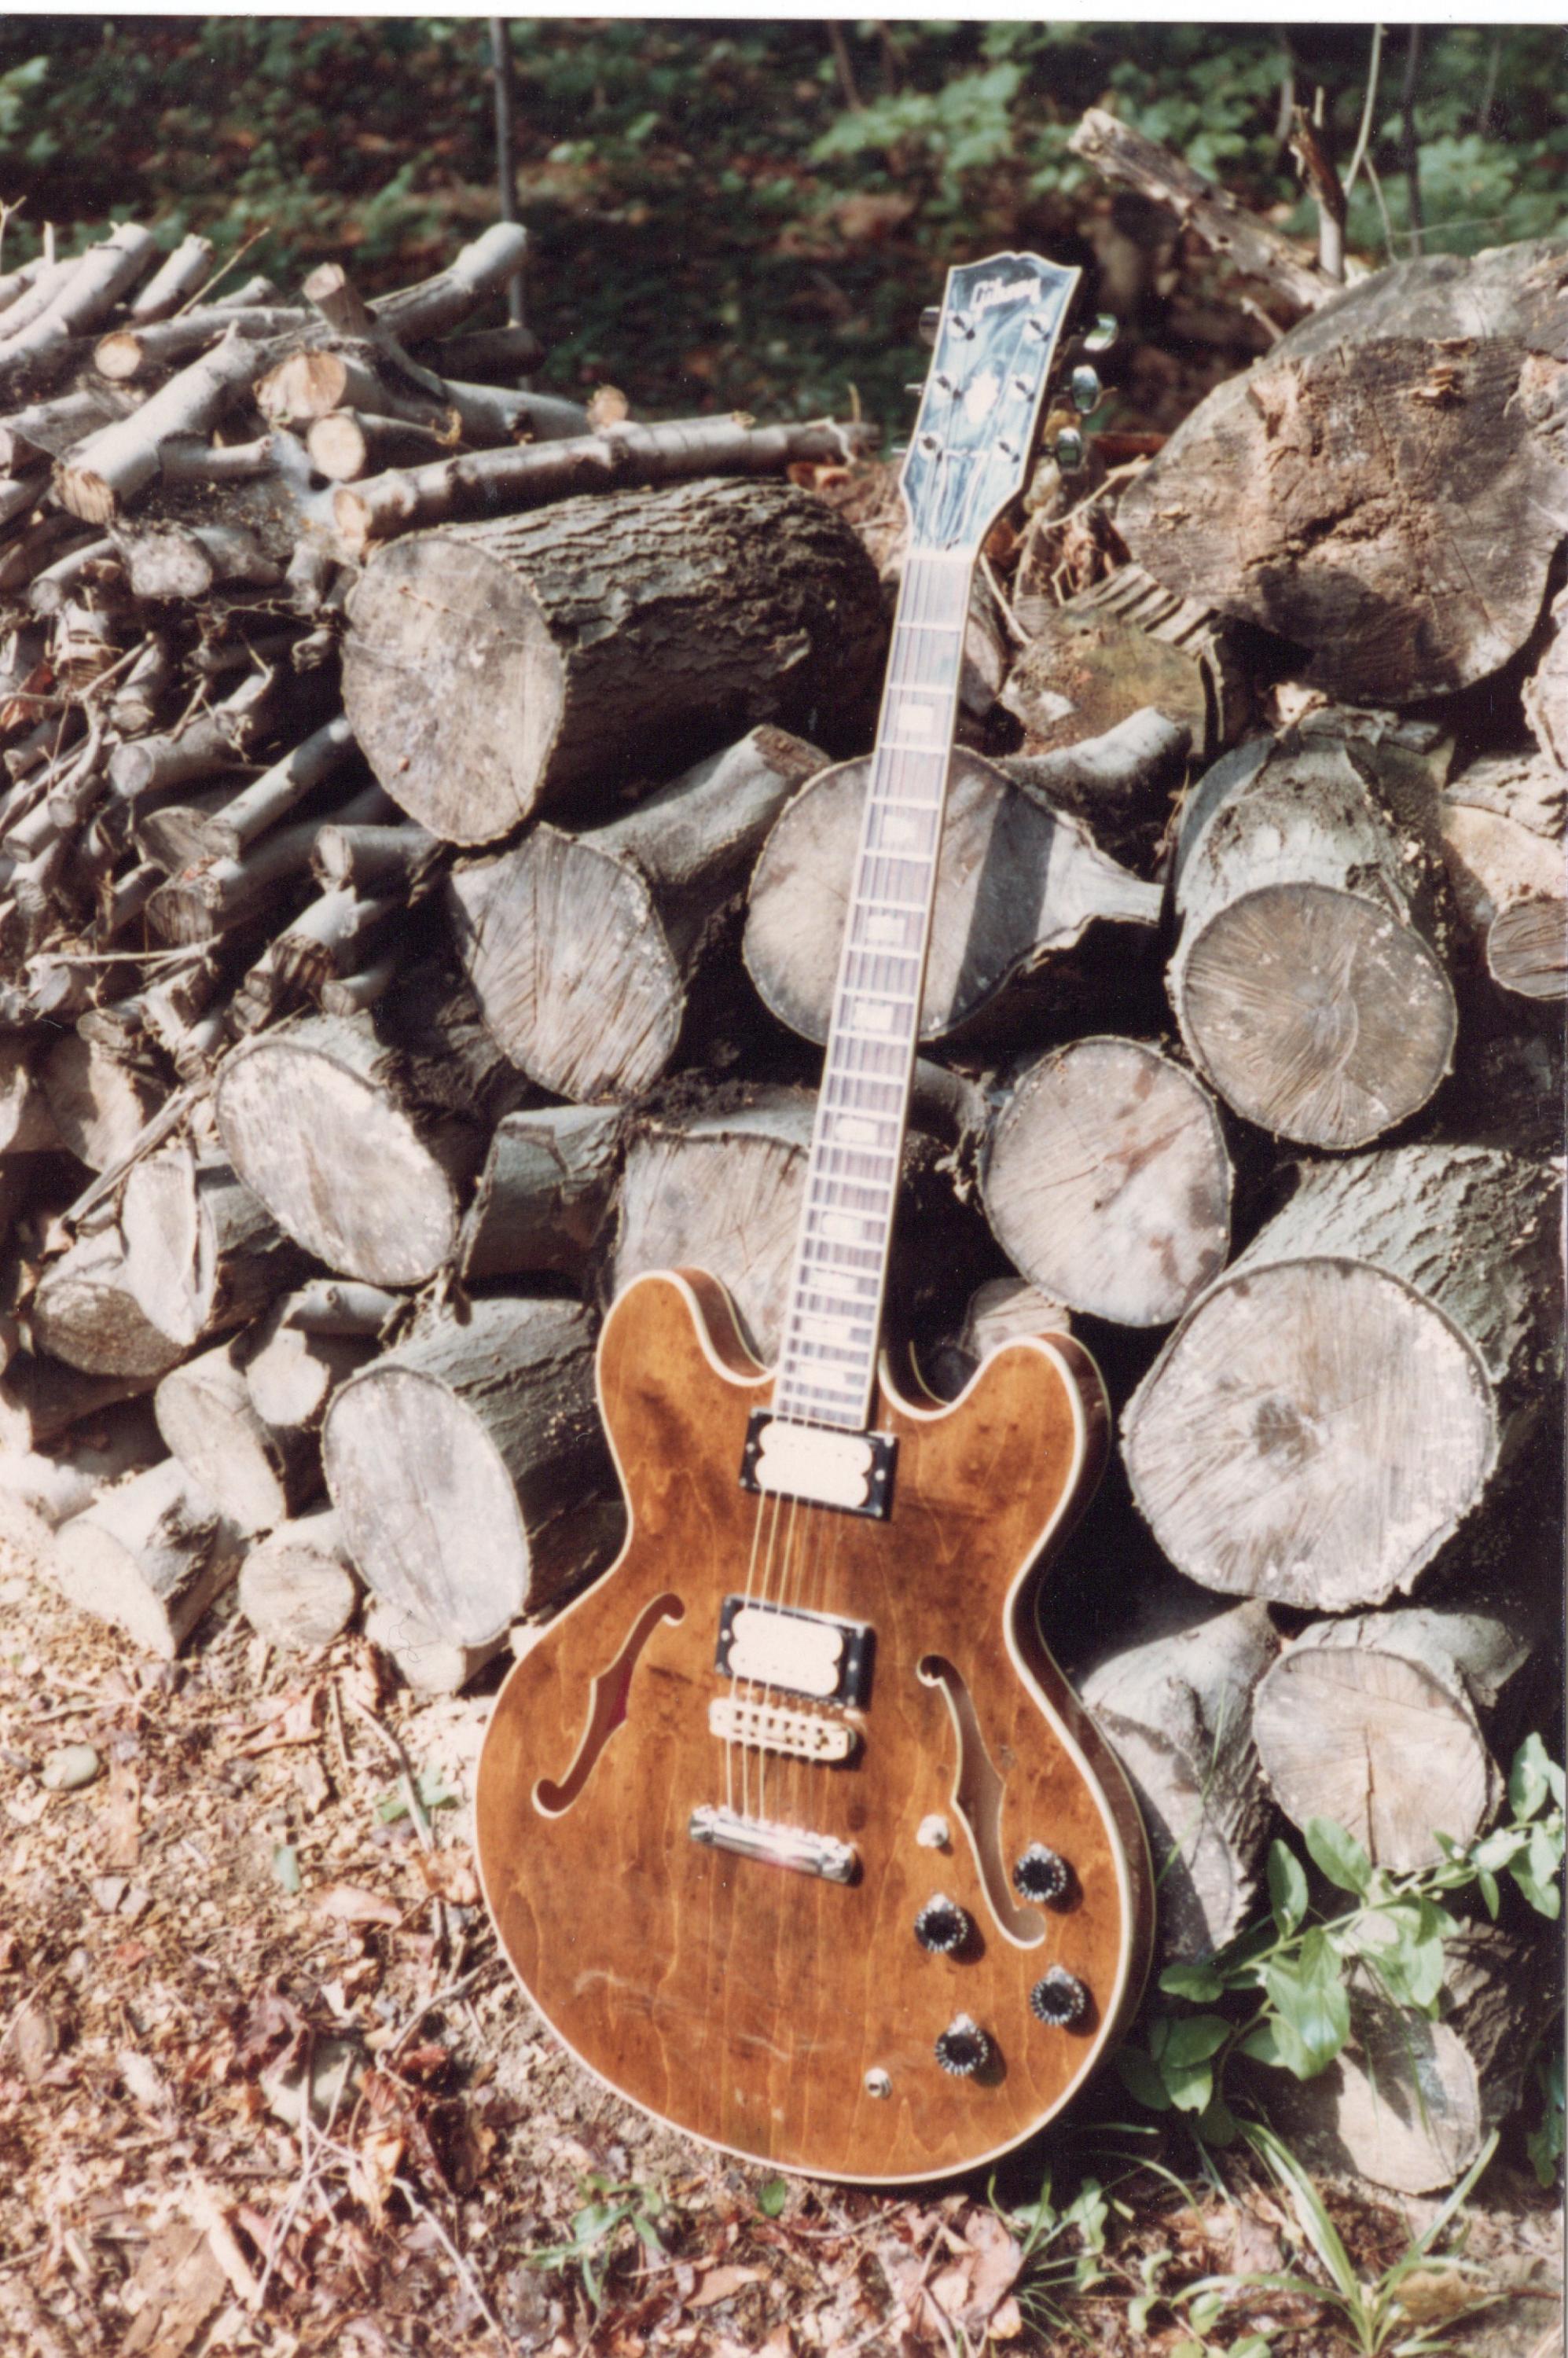 Share your ES-335-335-jpg